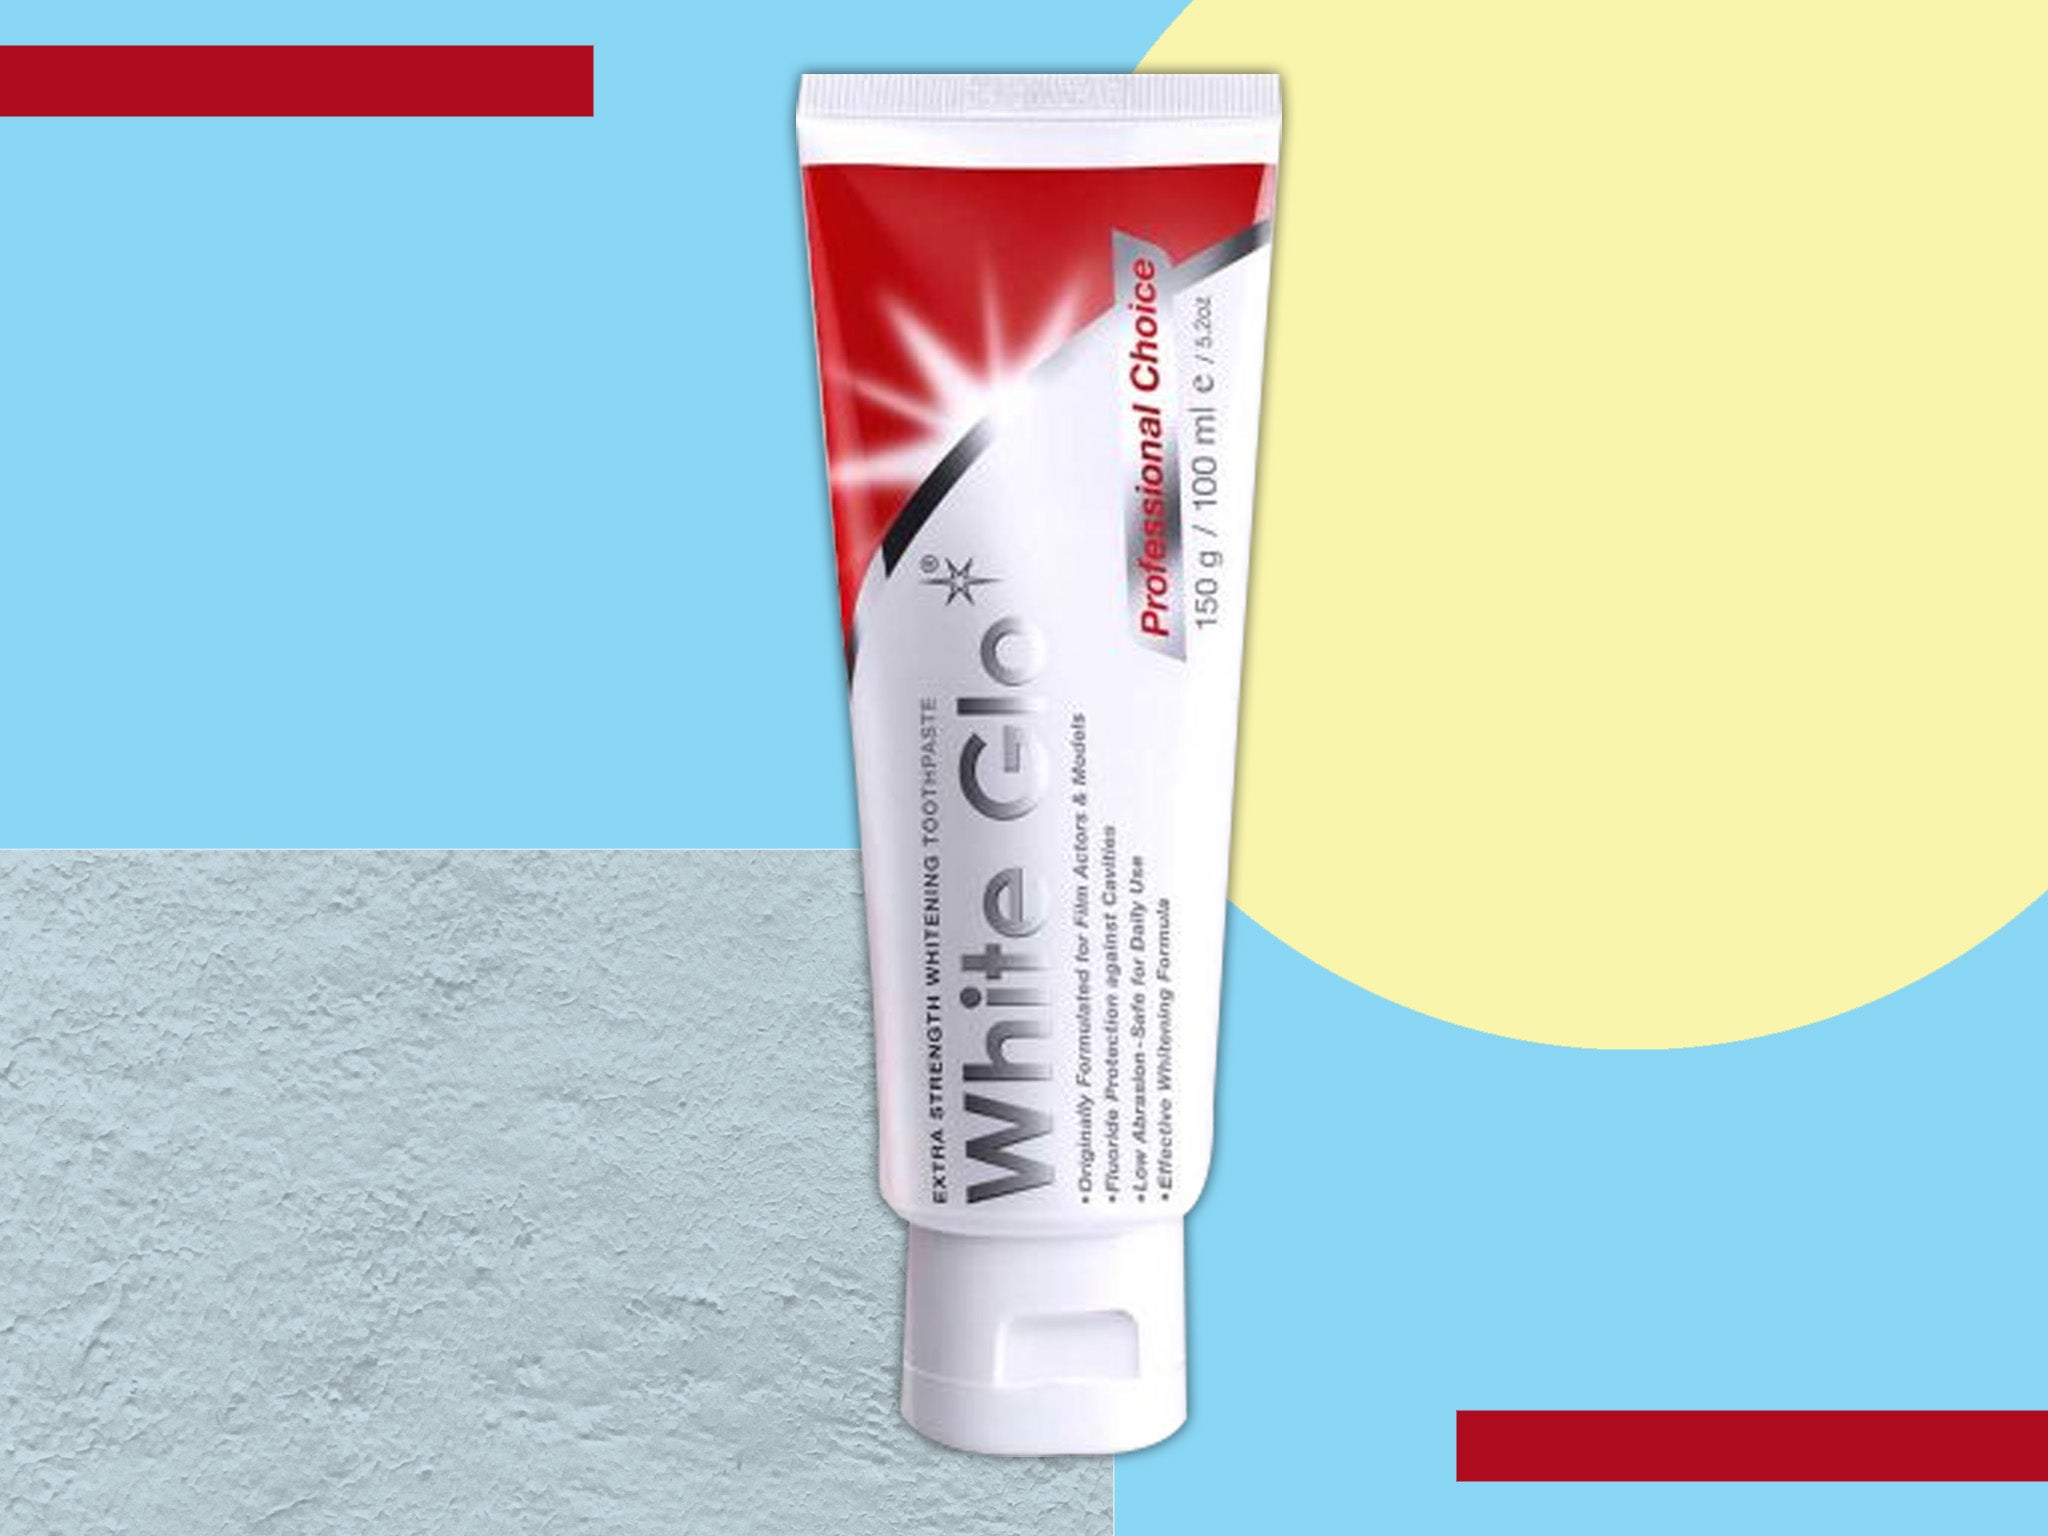 Simply swap with your twice-a-day toothpaste and your whitening routine couldn’t be simpler